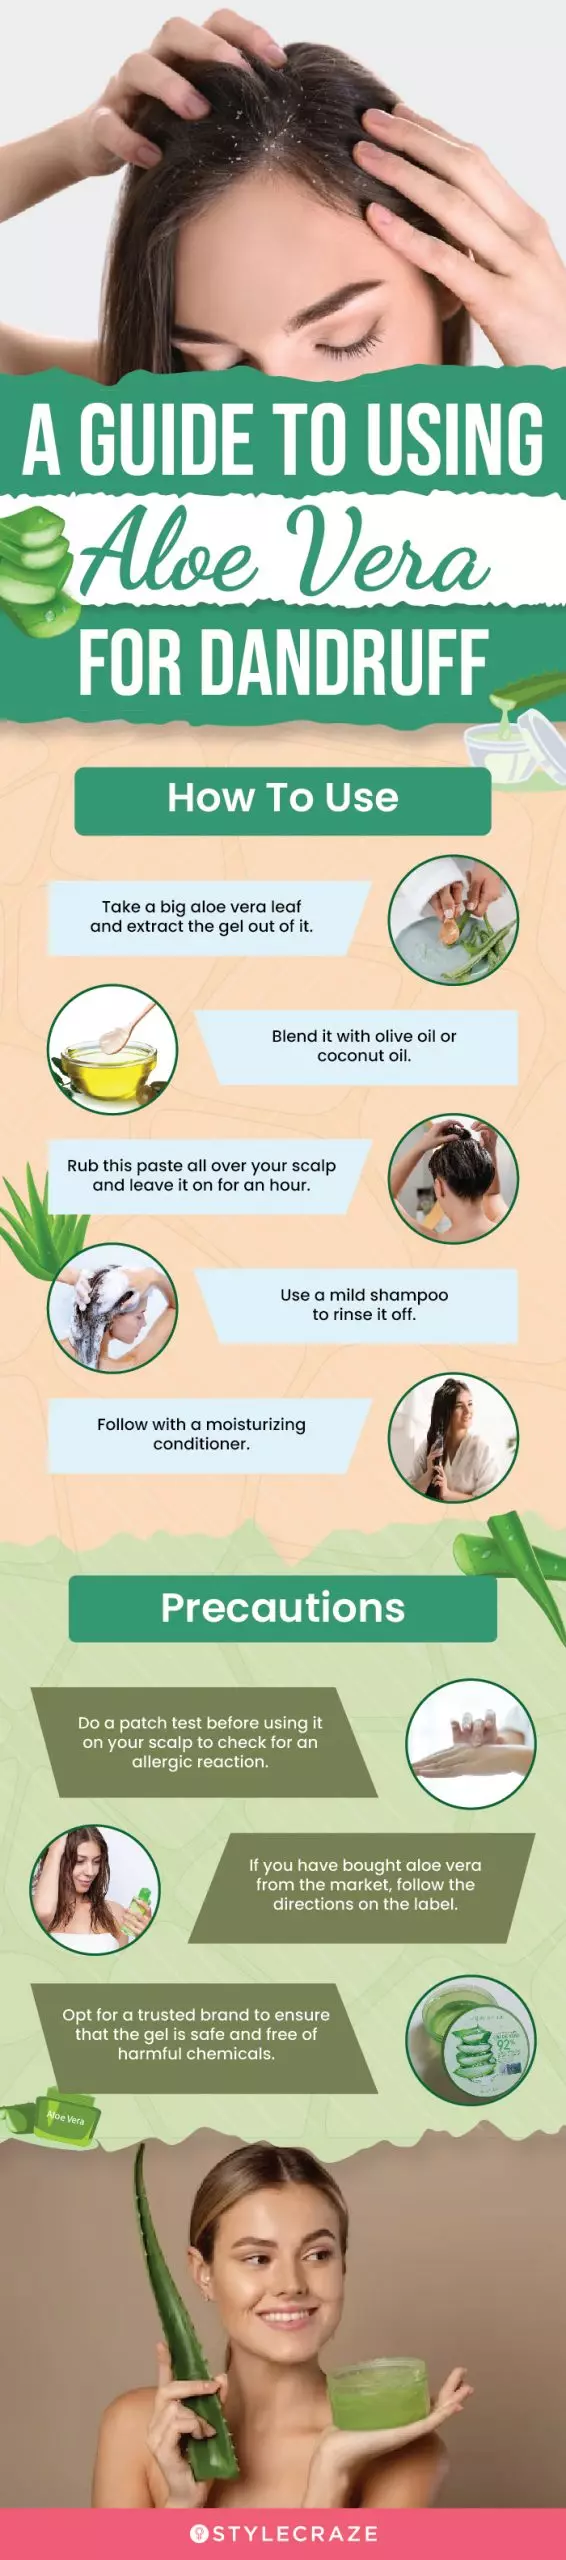 a guide to using aloe vera for dandruff(infographic)